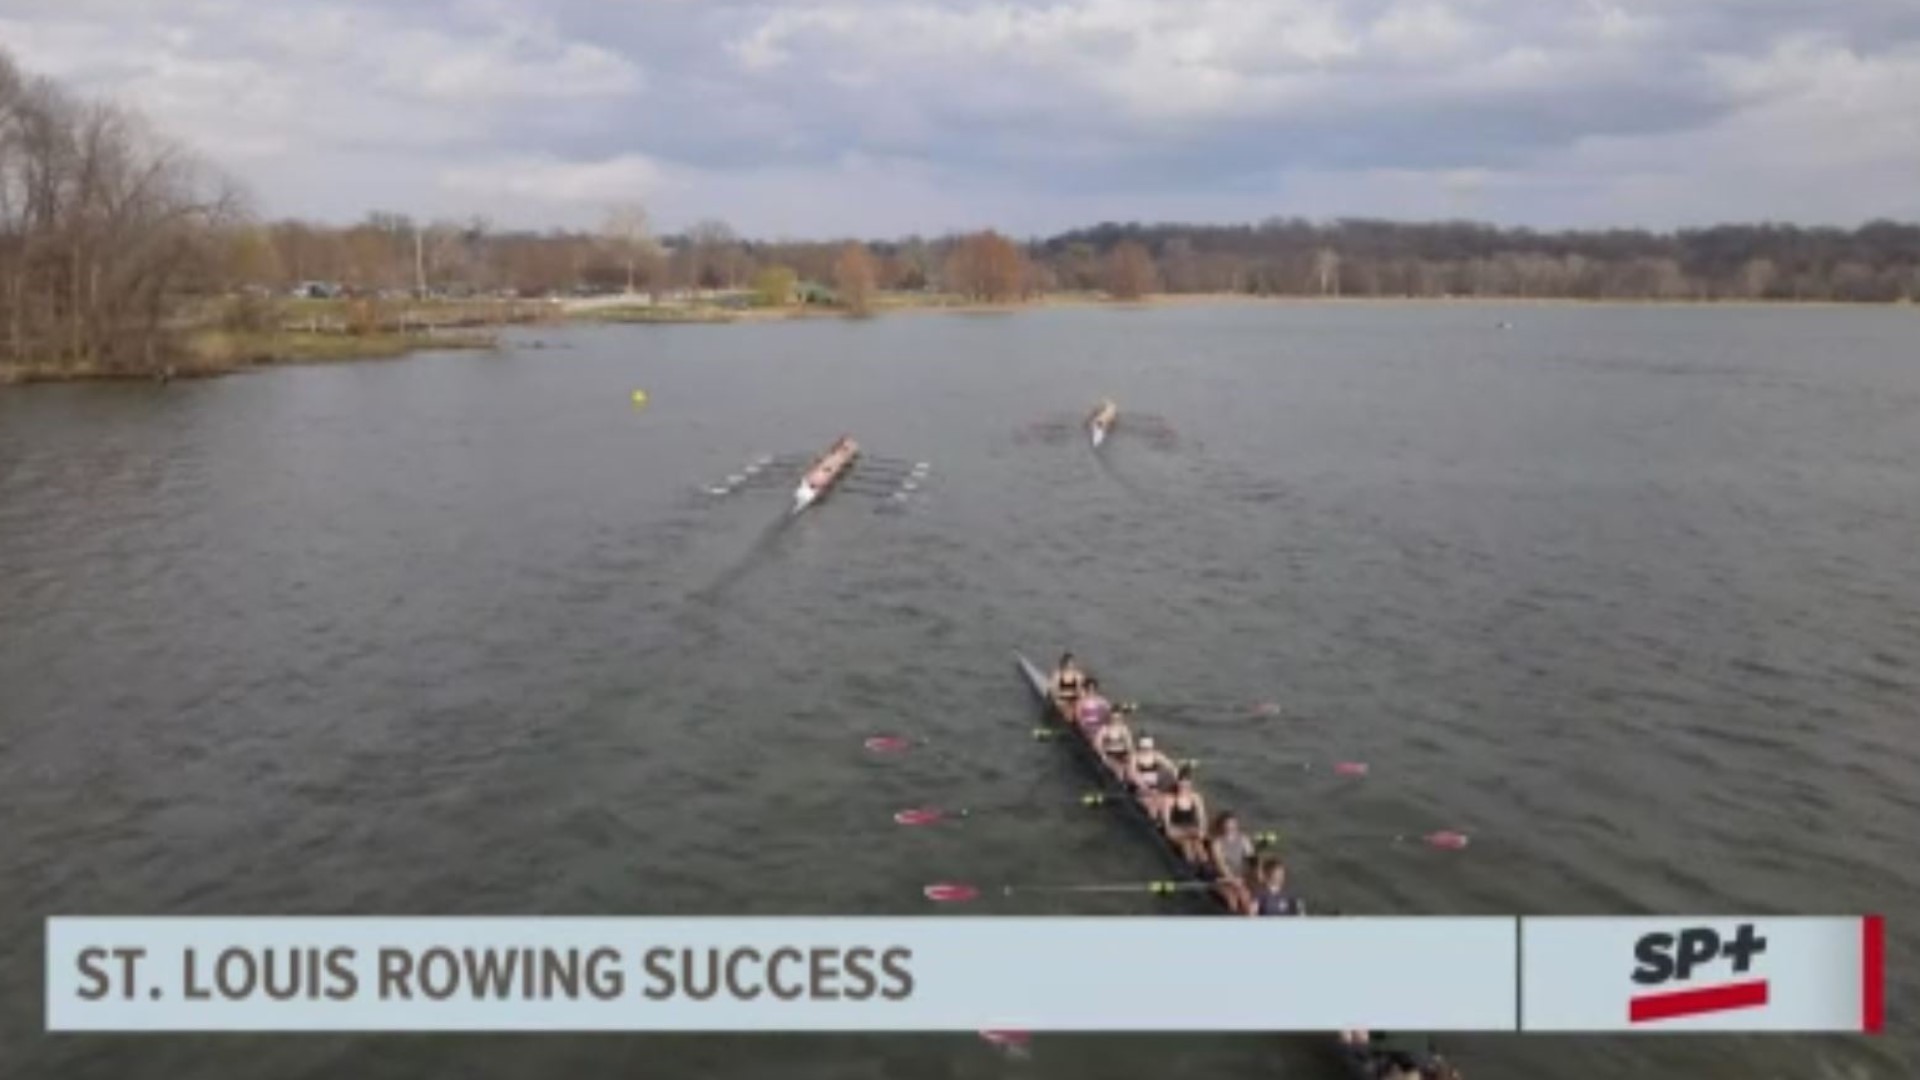 St. Louis Rowing Club is one of the top teams in the Midwest. A St. Louis-area student with cystic fibrosis found success with the club.